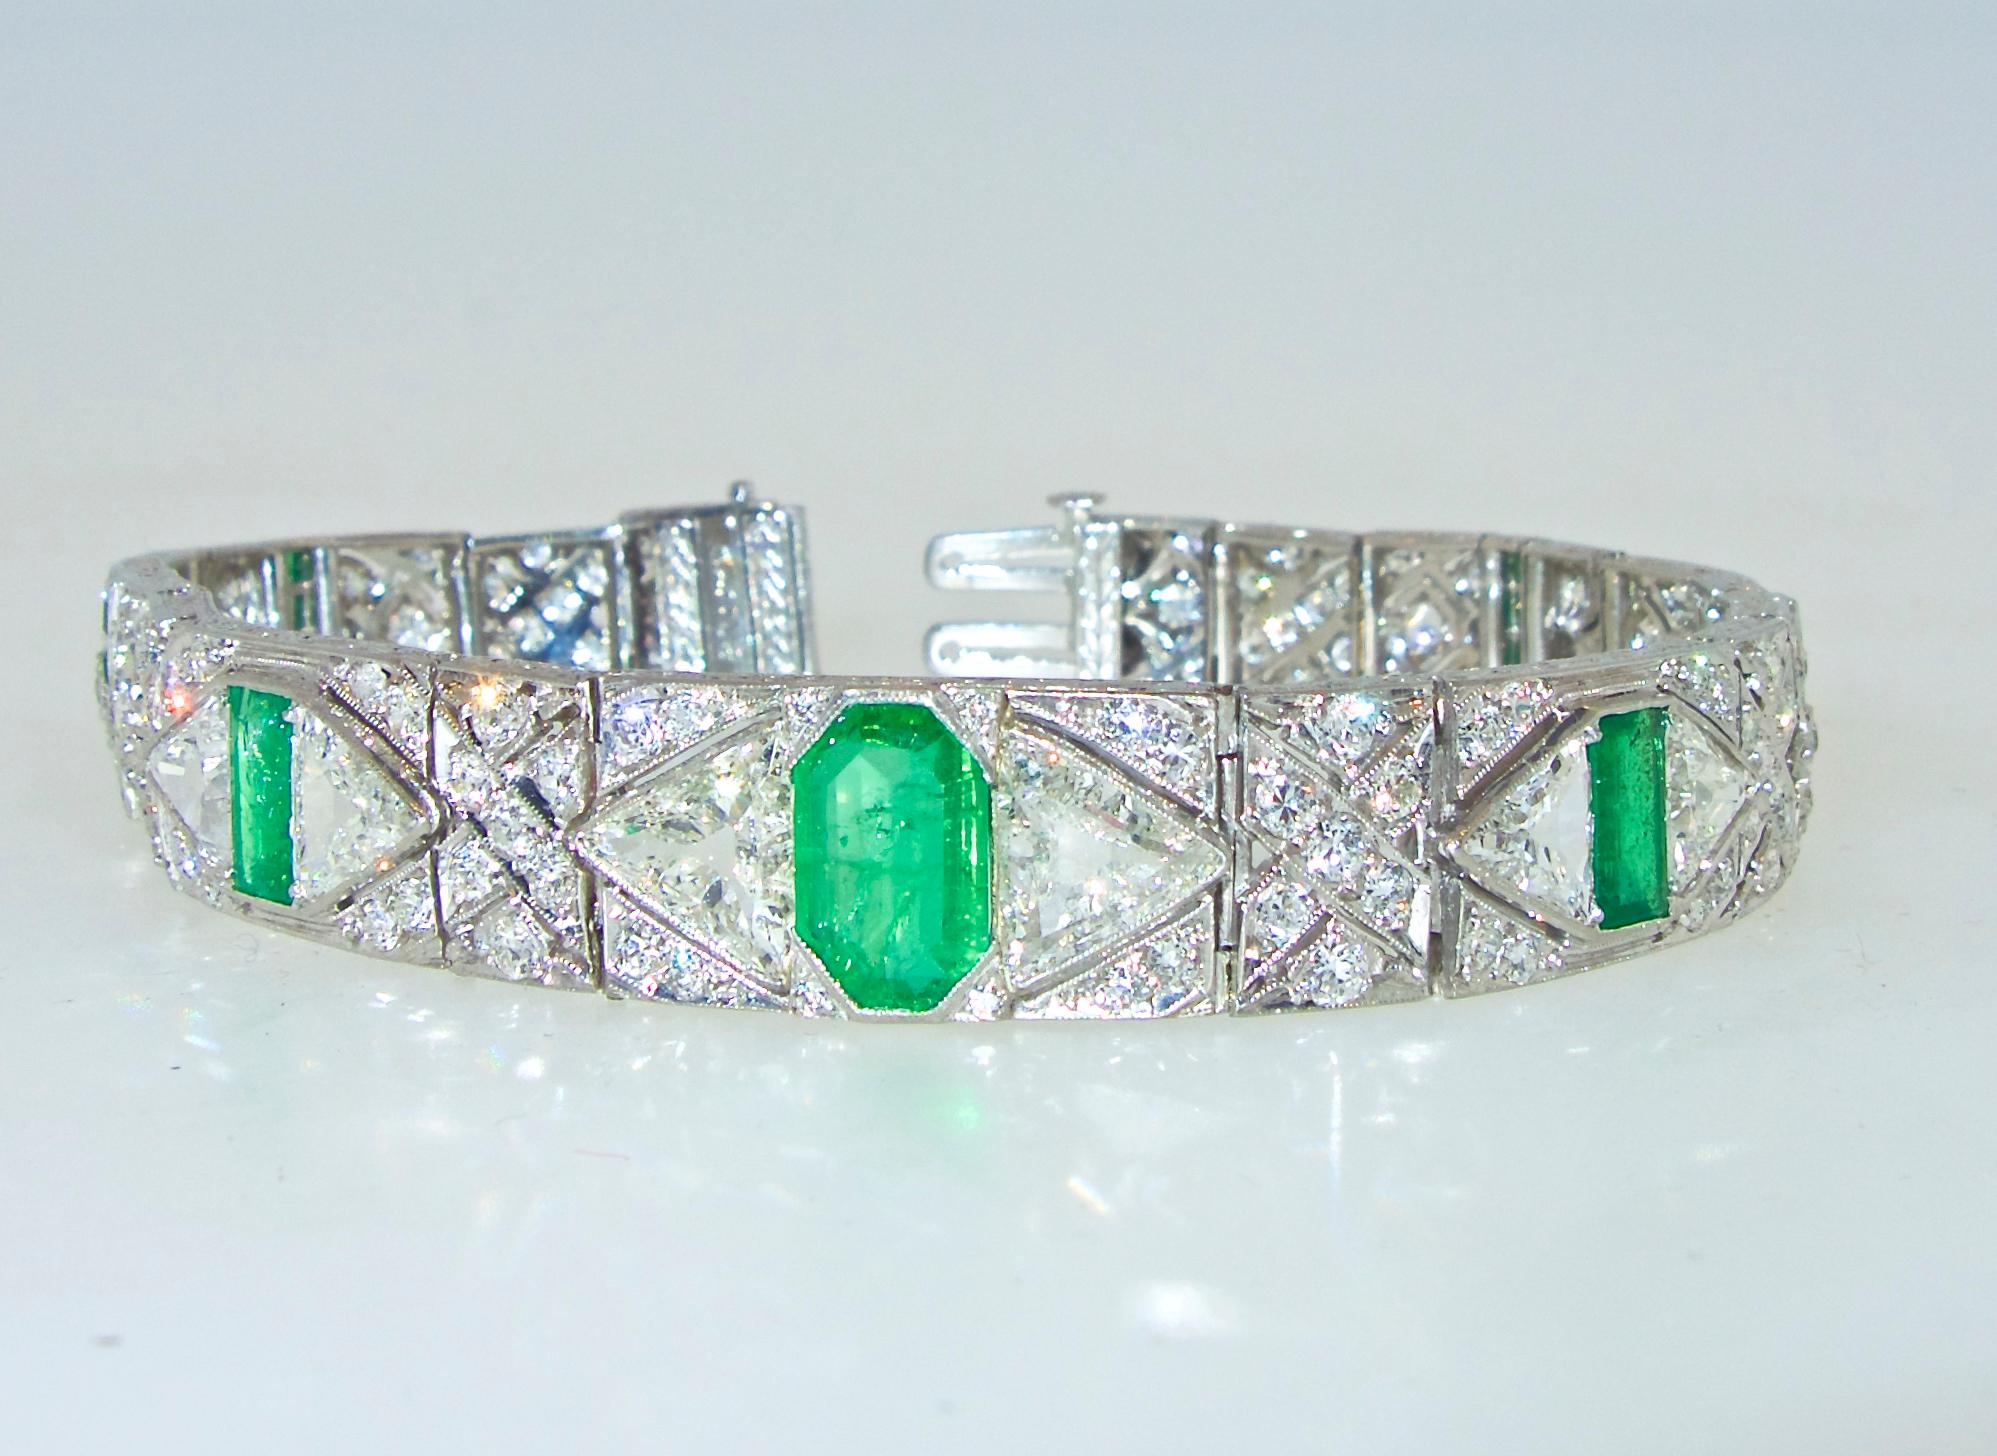 Striking Art Deco design with fine emeralds andlarge fancy cut diamonds.  The total diamond weight is approximately 11.3 cts.,   The diamonds are both European cut and large triangle cuts.  These triangular cuts are unusual and hard to find.  They